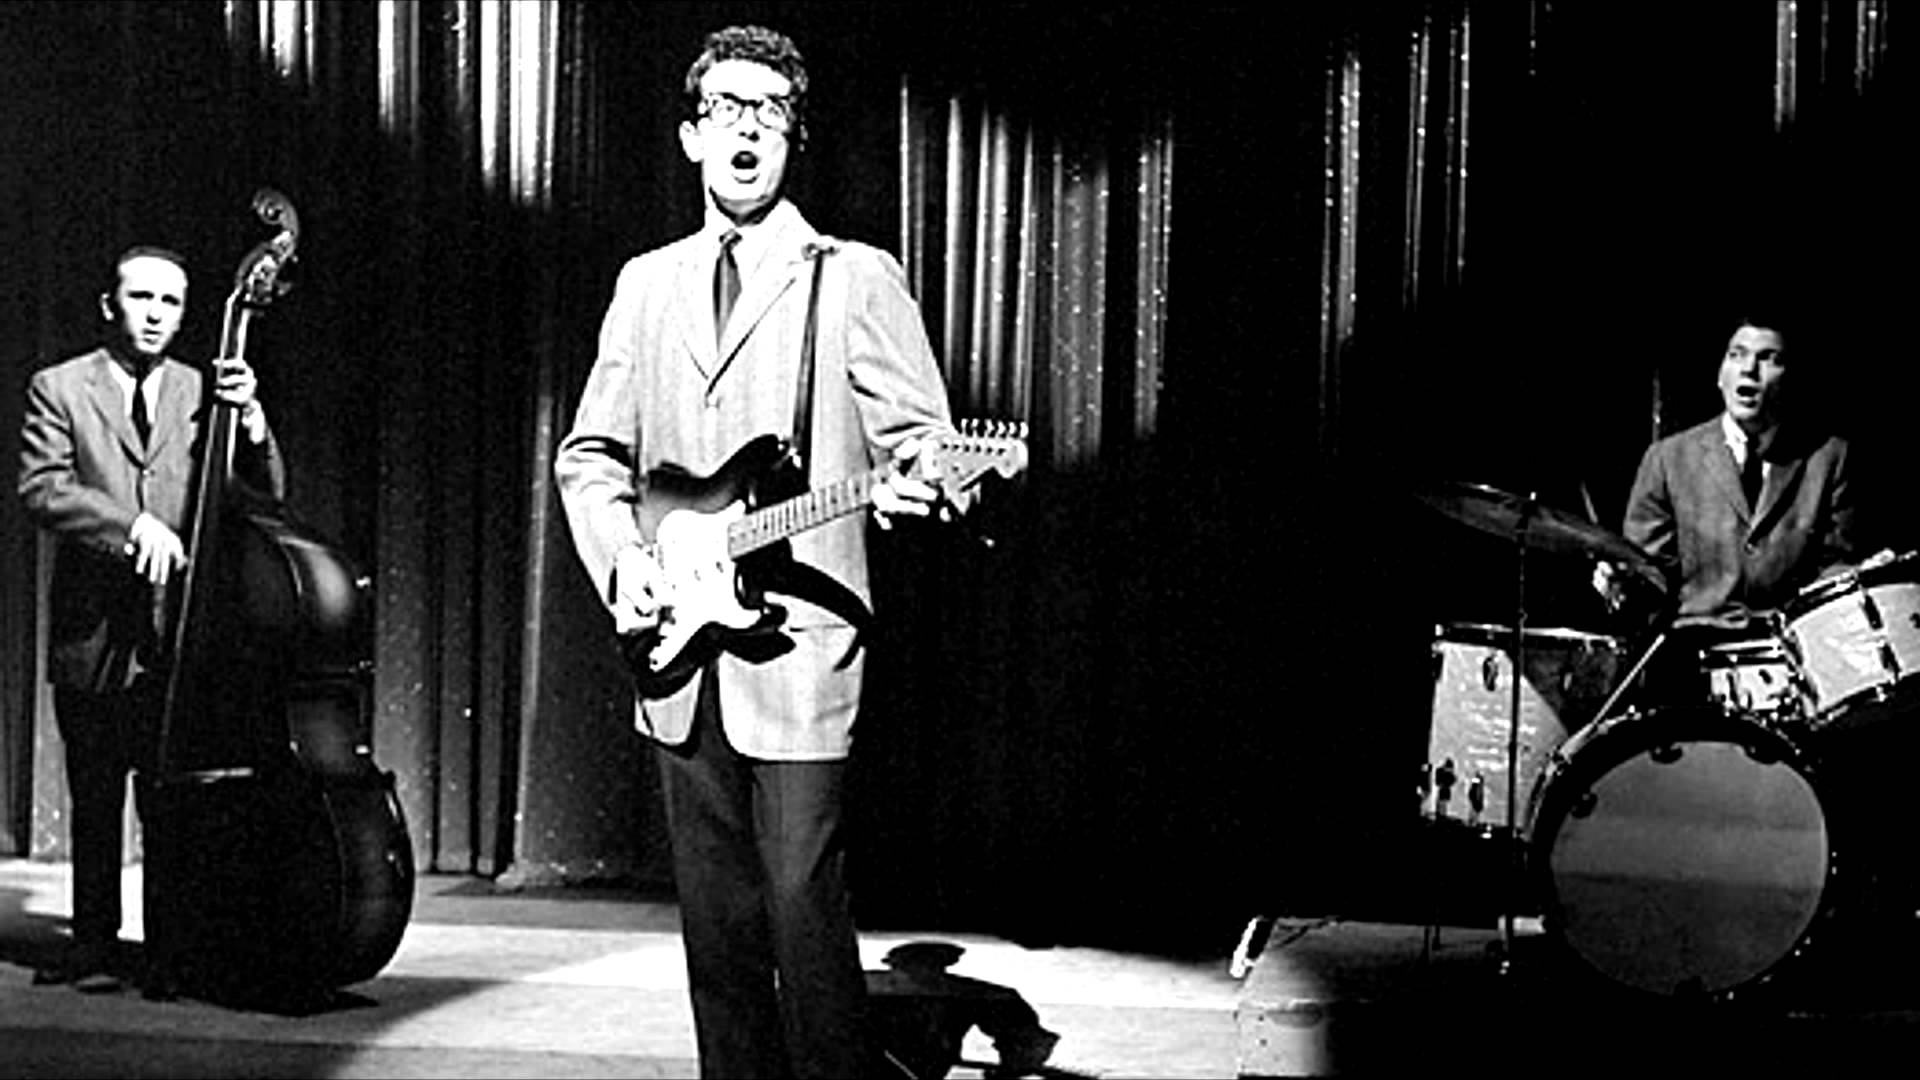 download buddy holly podcast guitar